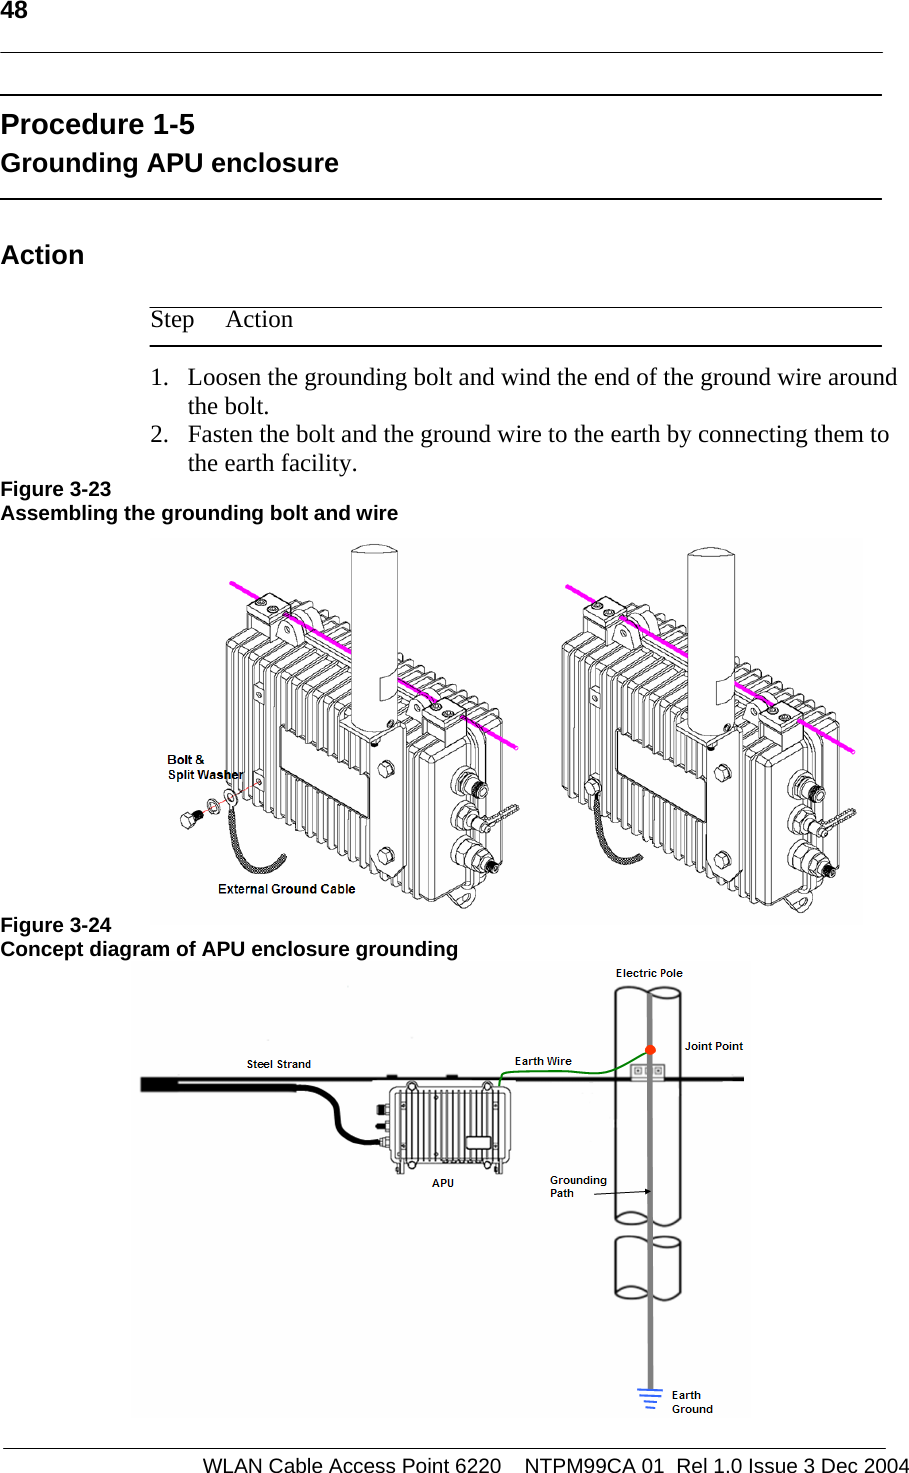   48    WLAN Cable Access Point 6220    NTPM99CA 01  Rel 1.0 Issue 3 Dec 2004 Procedure 1-5 Grounding APU enclosure   Action  Step Action  1.   Loosen the grounding bolt and wind the end of the ground wire around the bolt. 2. Fasten the bolt and the ground wire to the earth by connecting them to the earth facility. Figure 3-23 Assembling the grounding bolt and wire               Figure 3-24 Concept diagram of APU enclosure grounding           